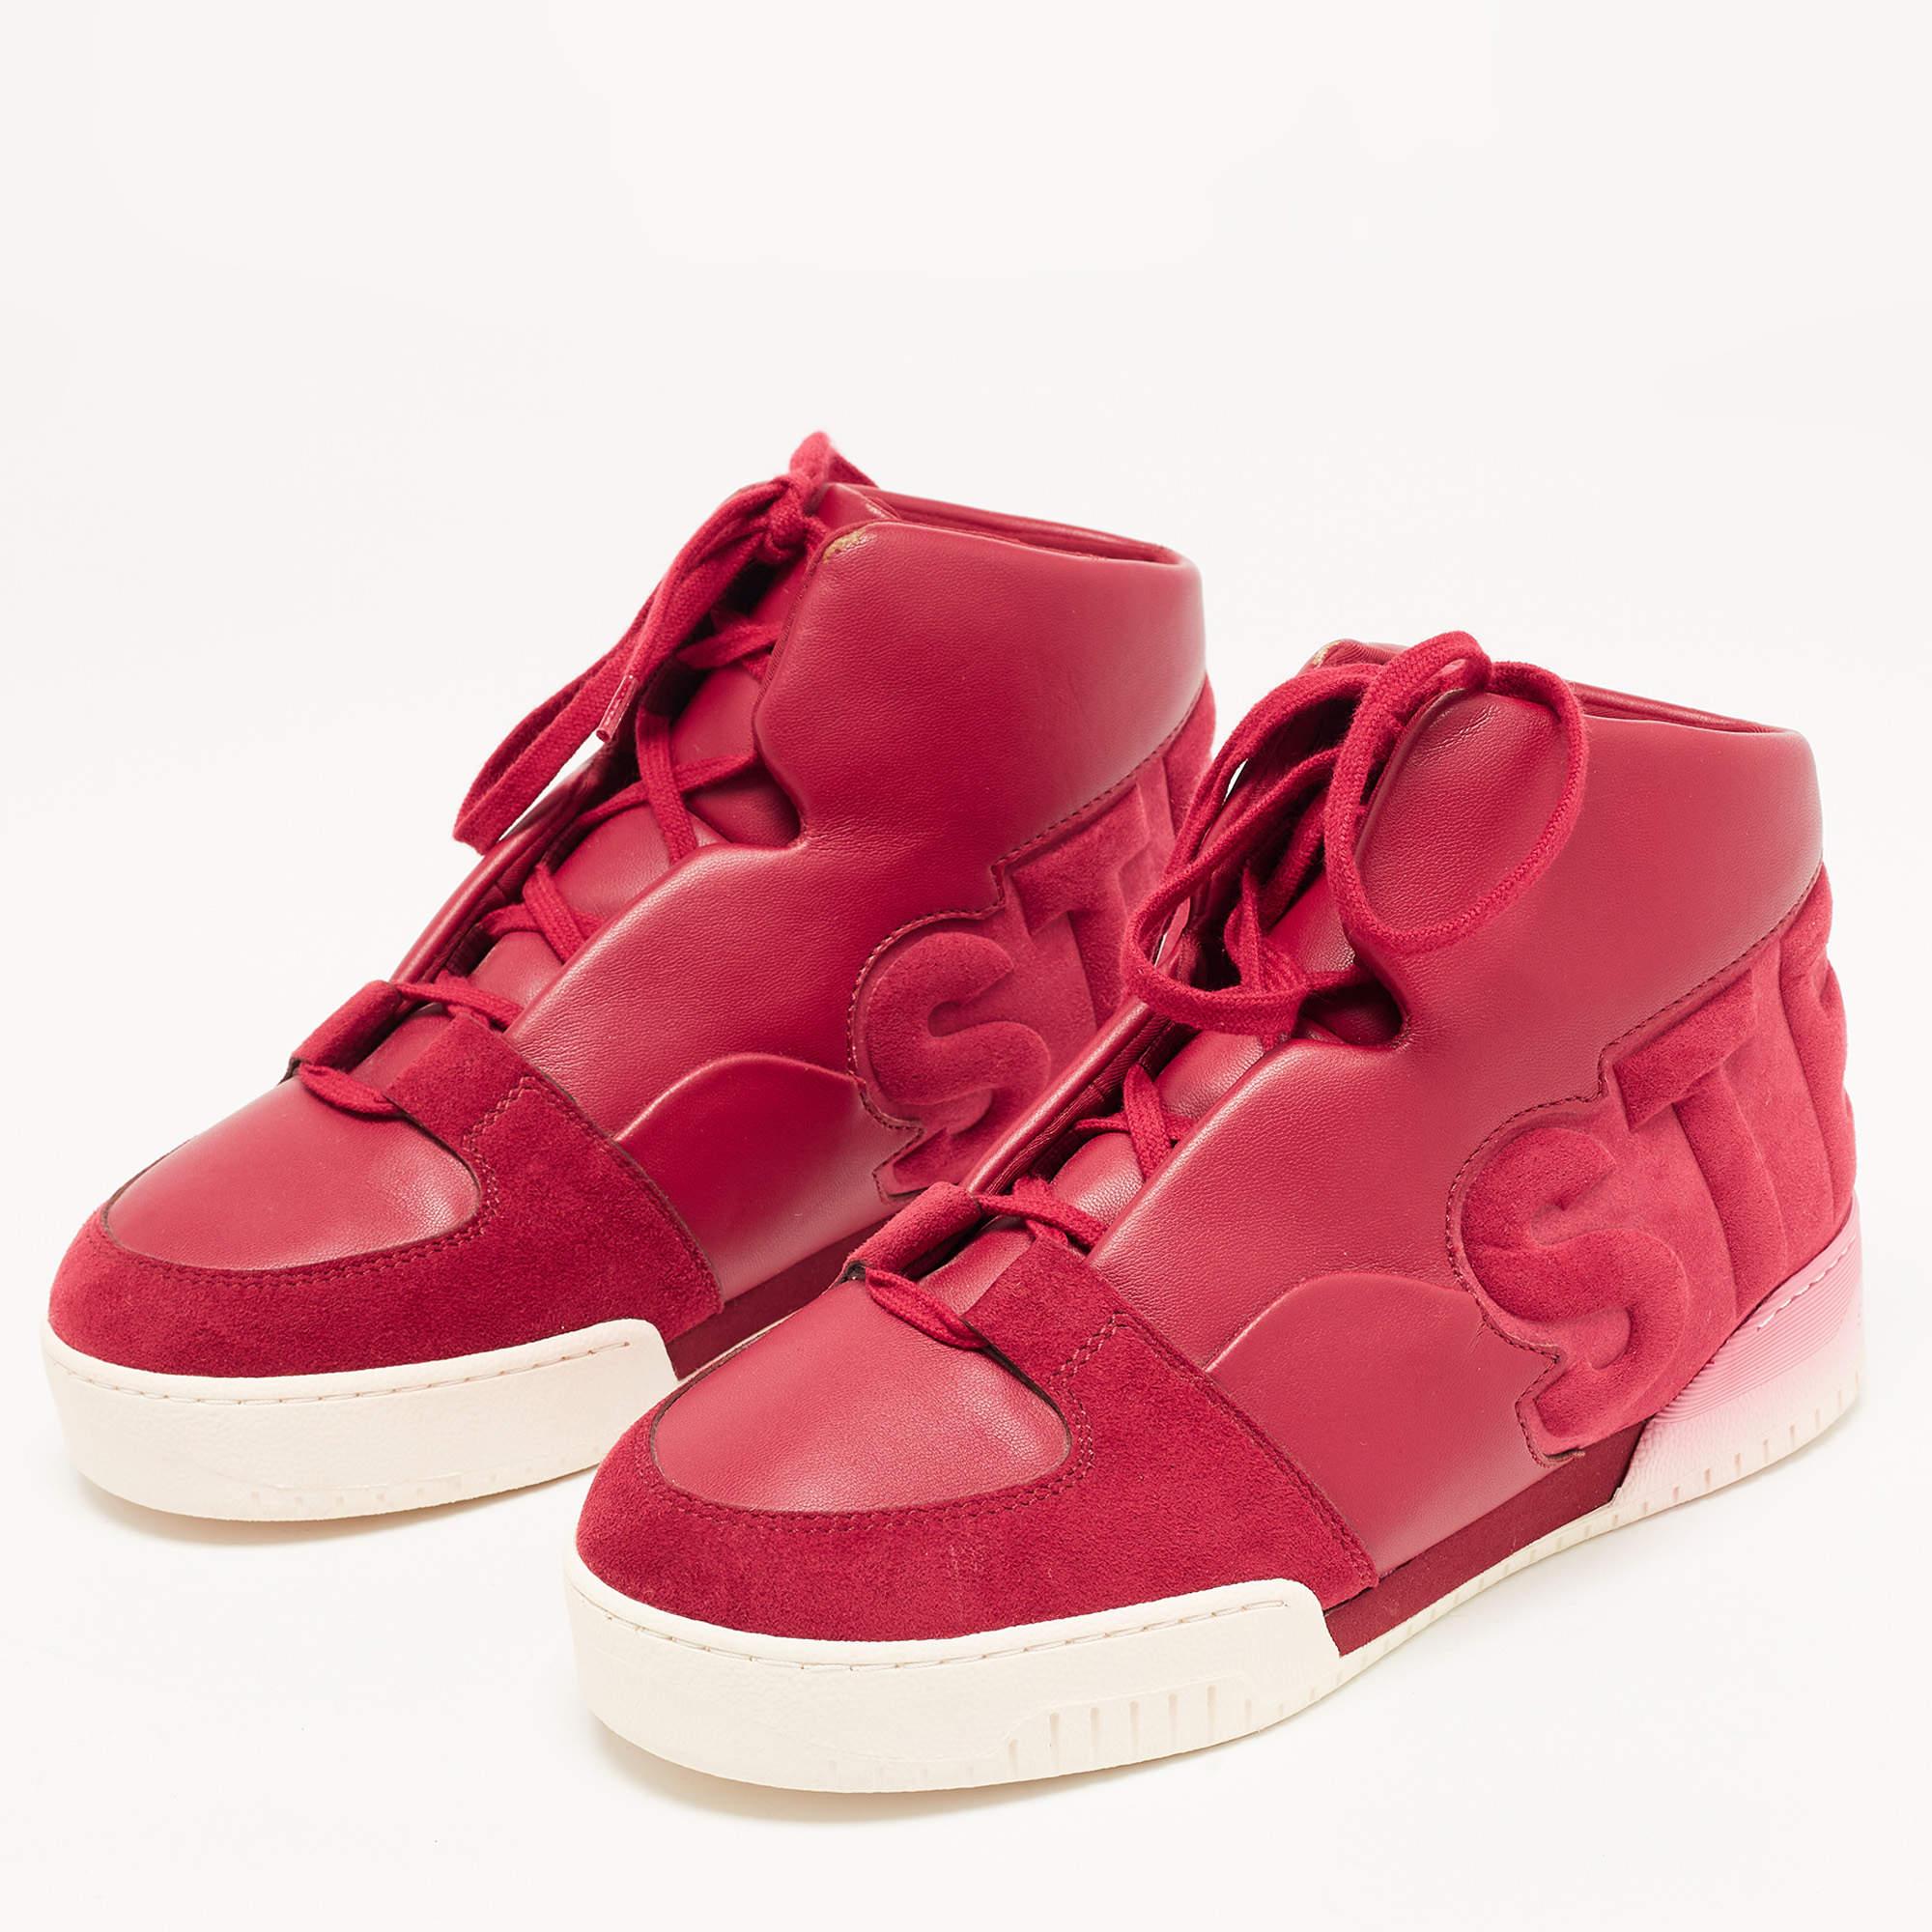 Women's Stella McCartney Red Faux Leather and Faux Suede High Top Sneakers Size 37